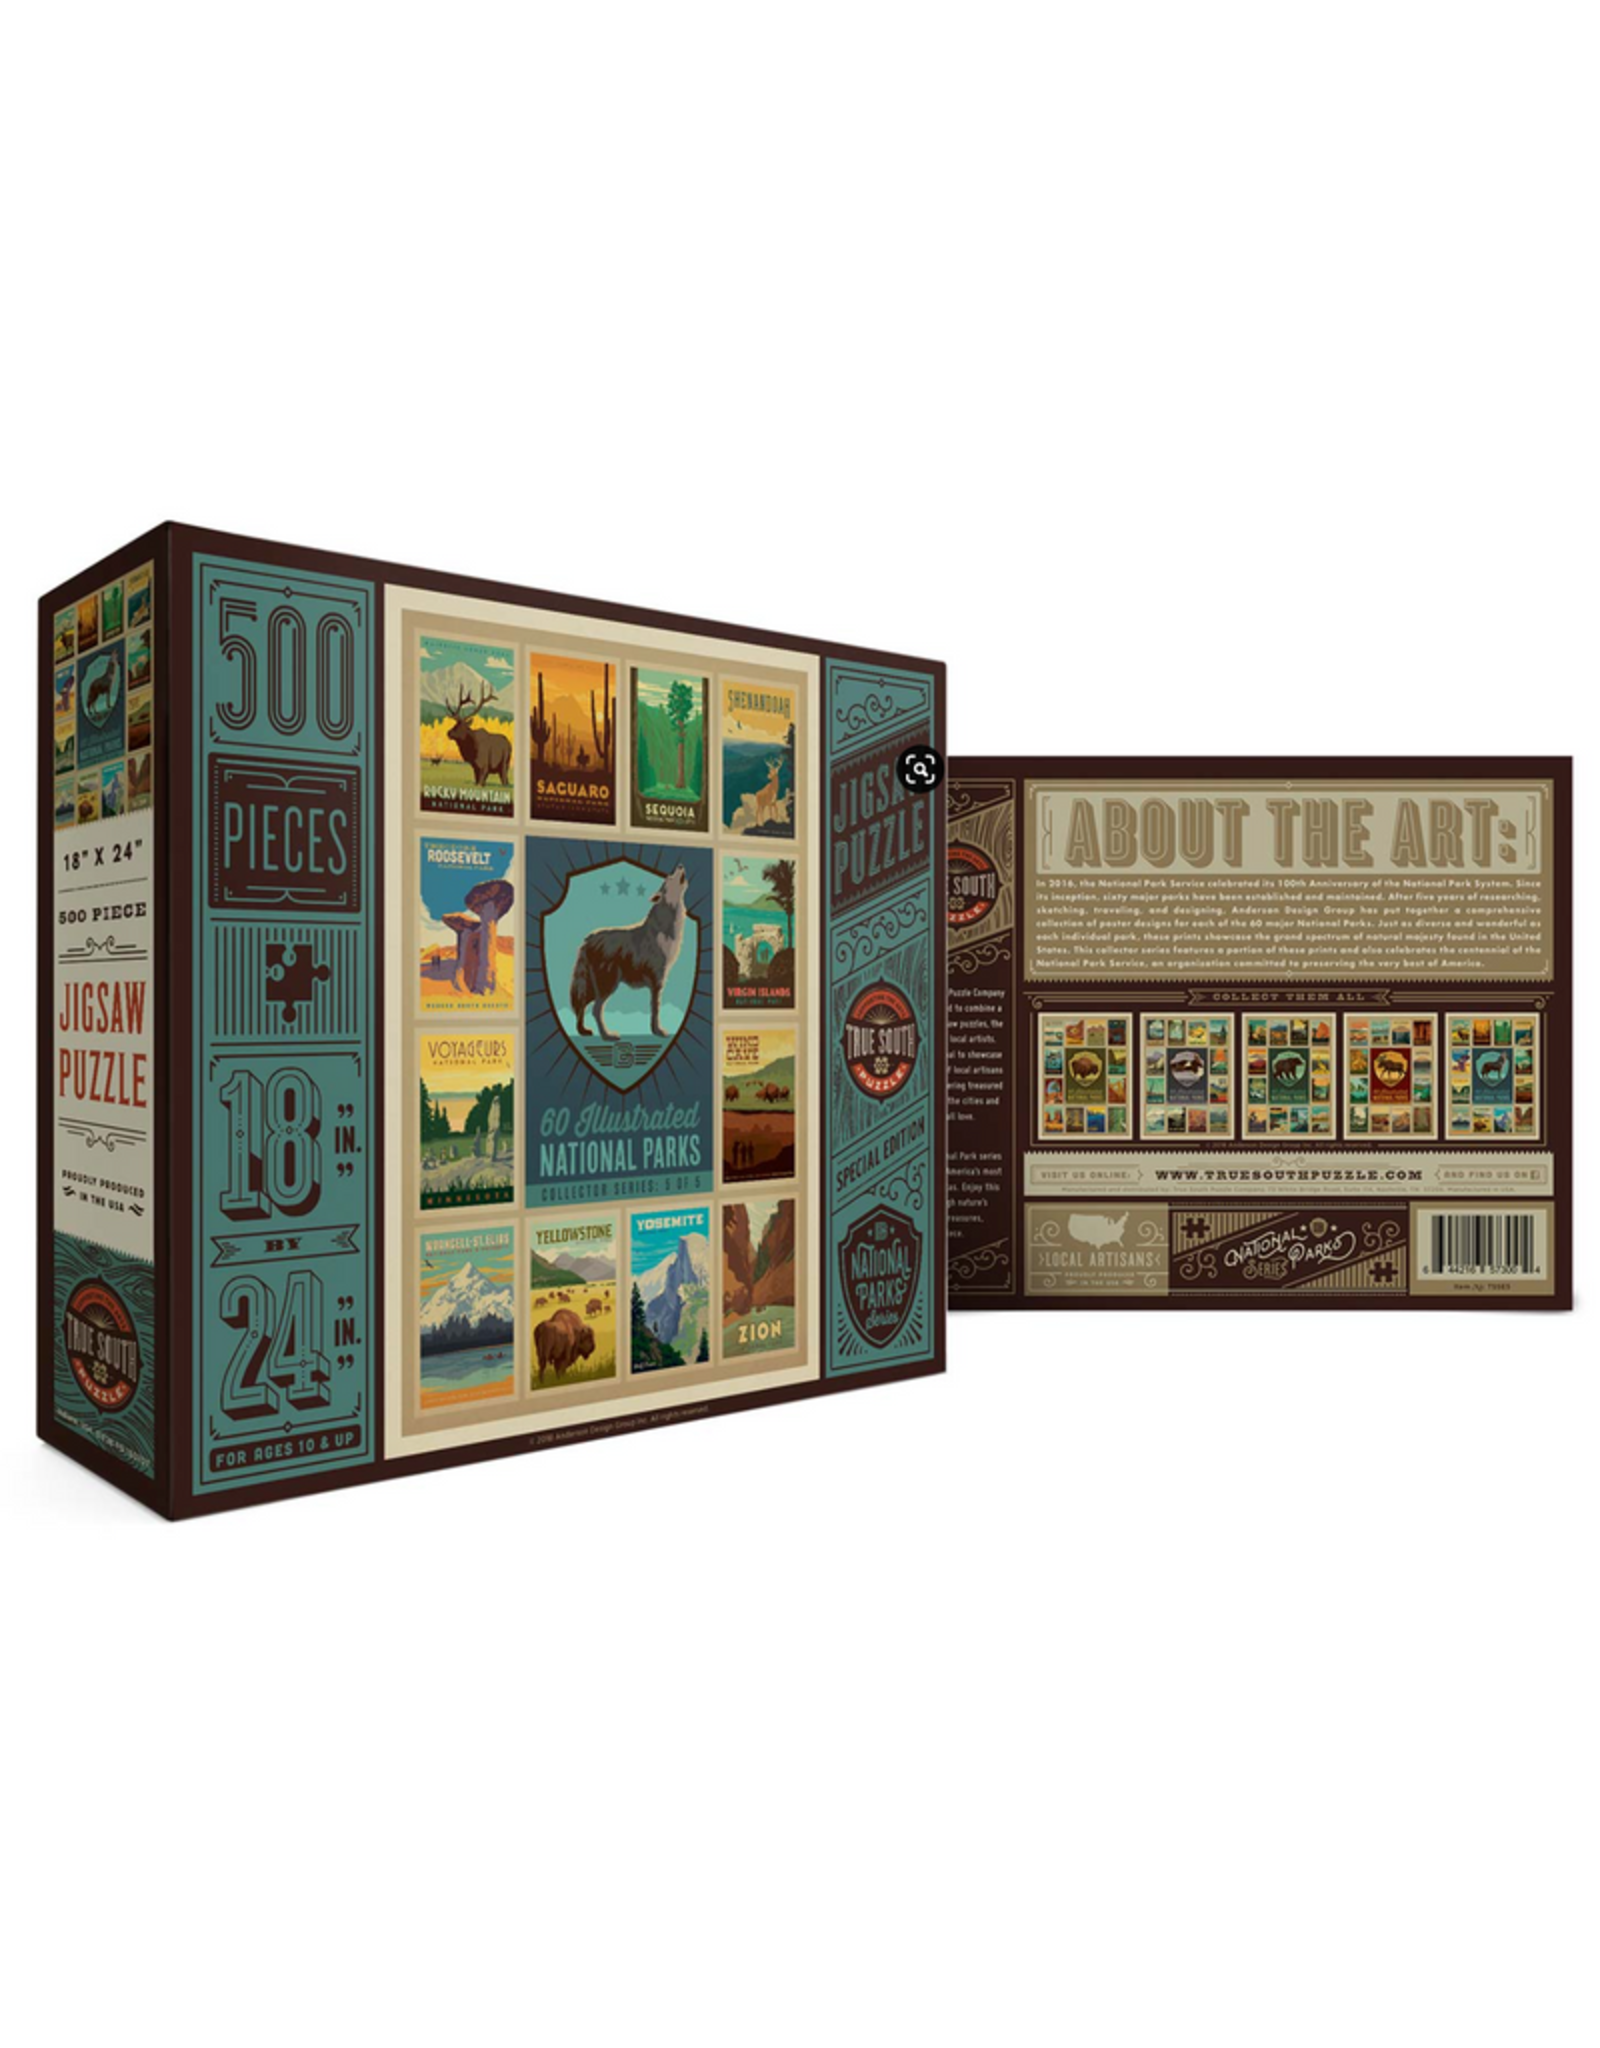 True South Puzzles Jigsaw Puzzles